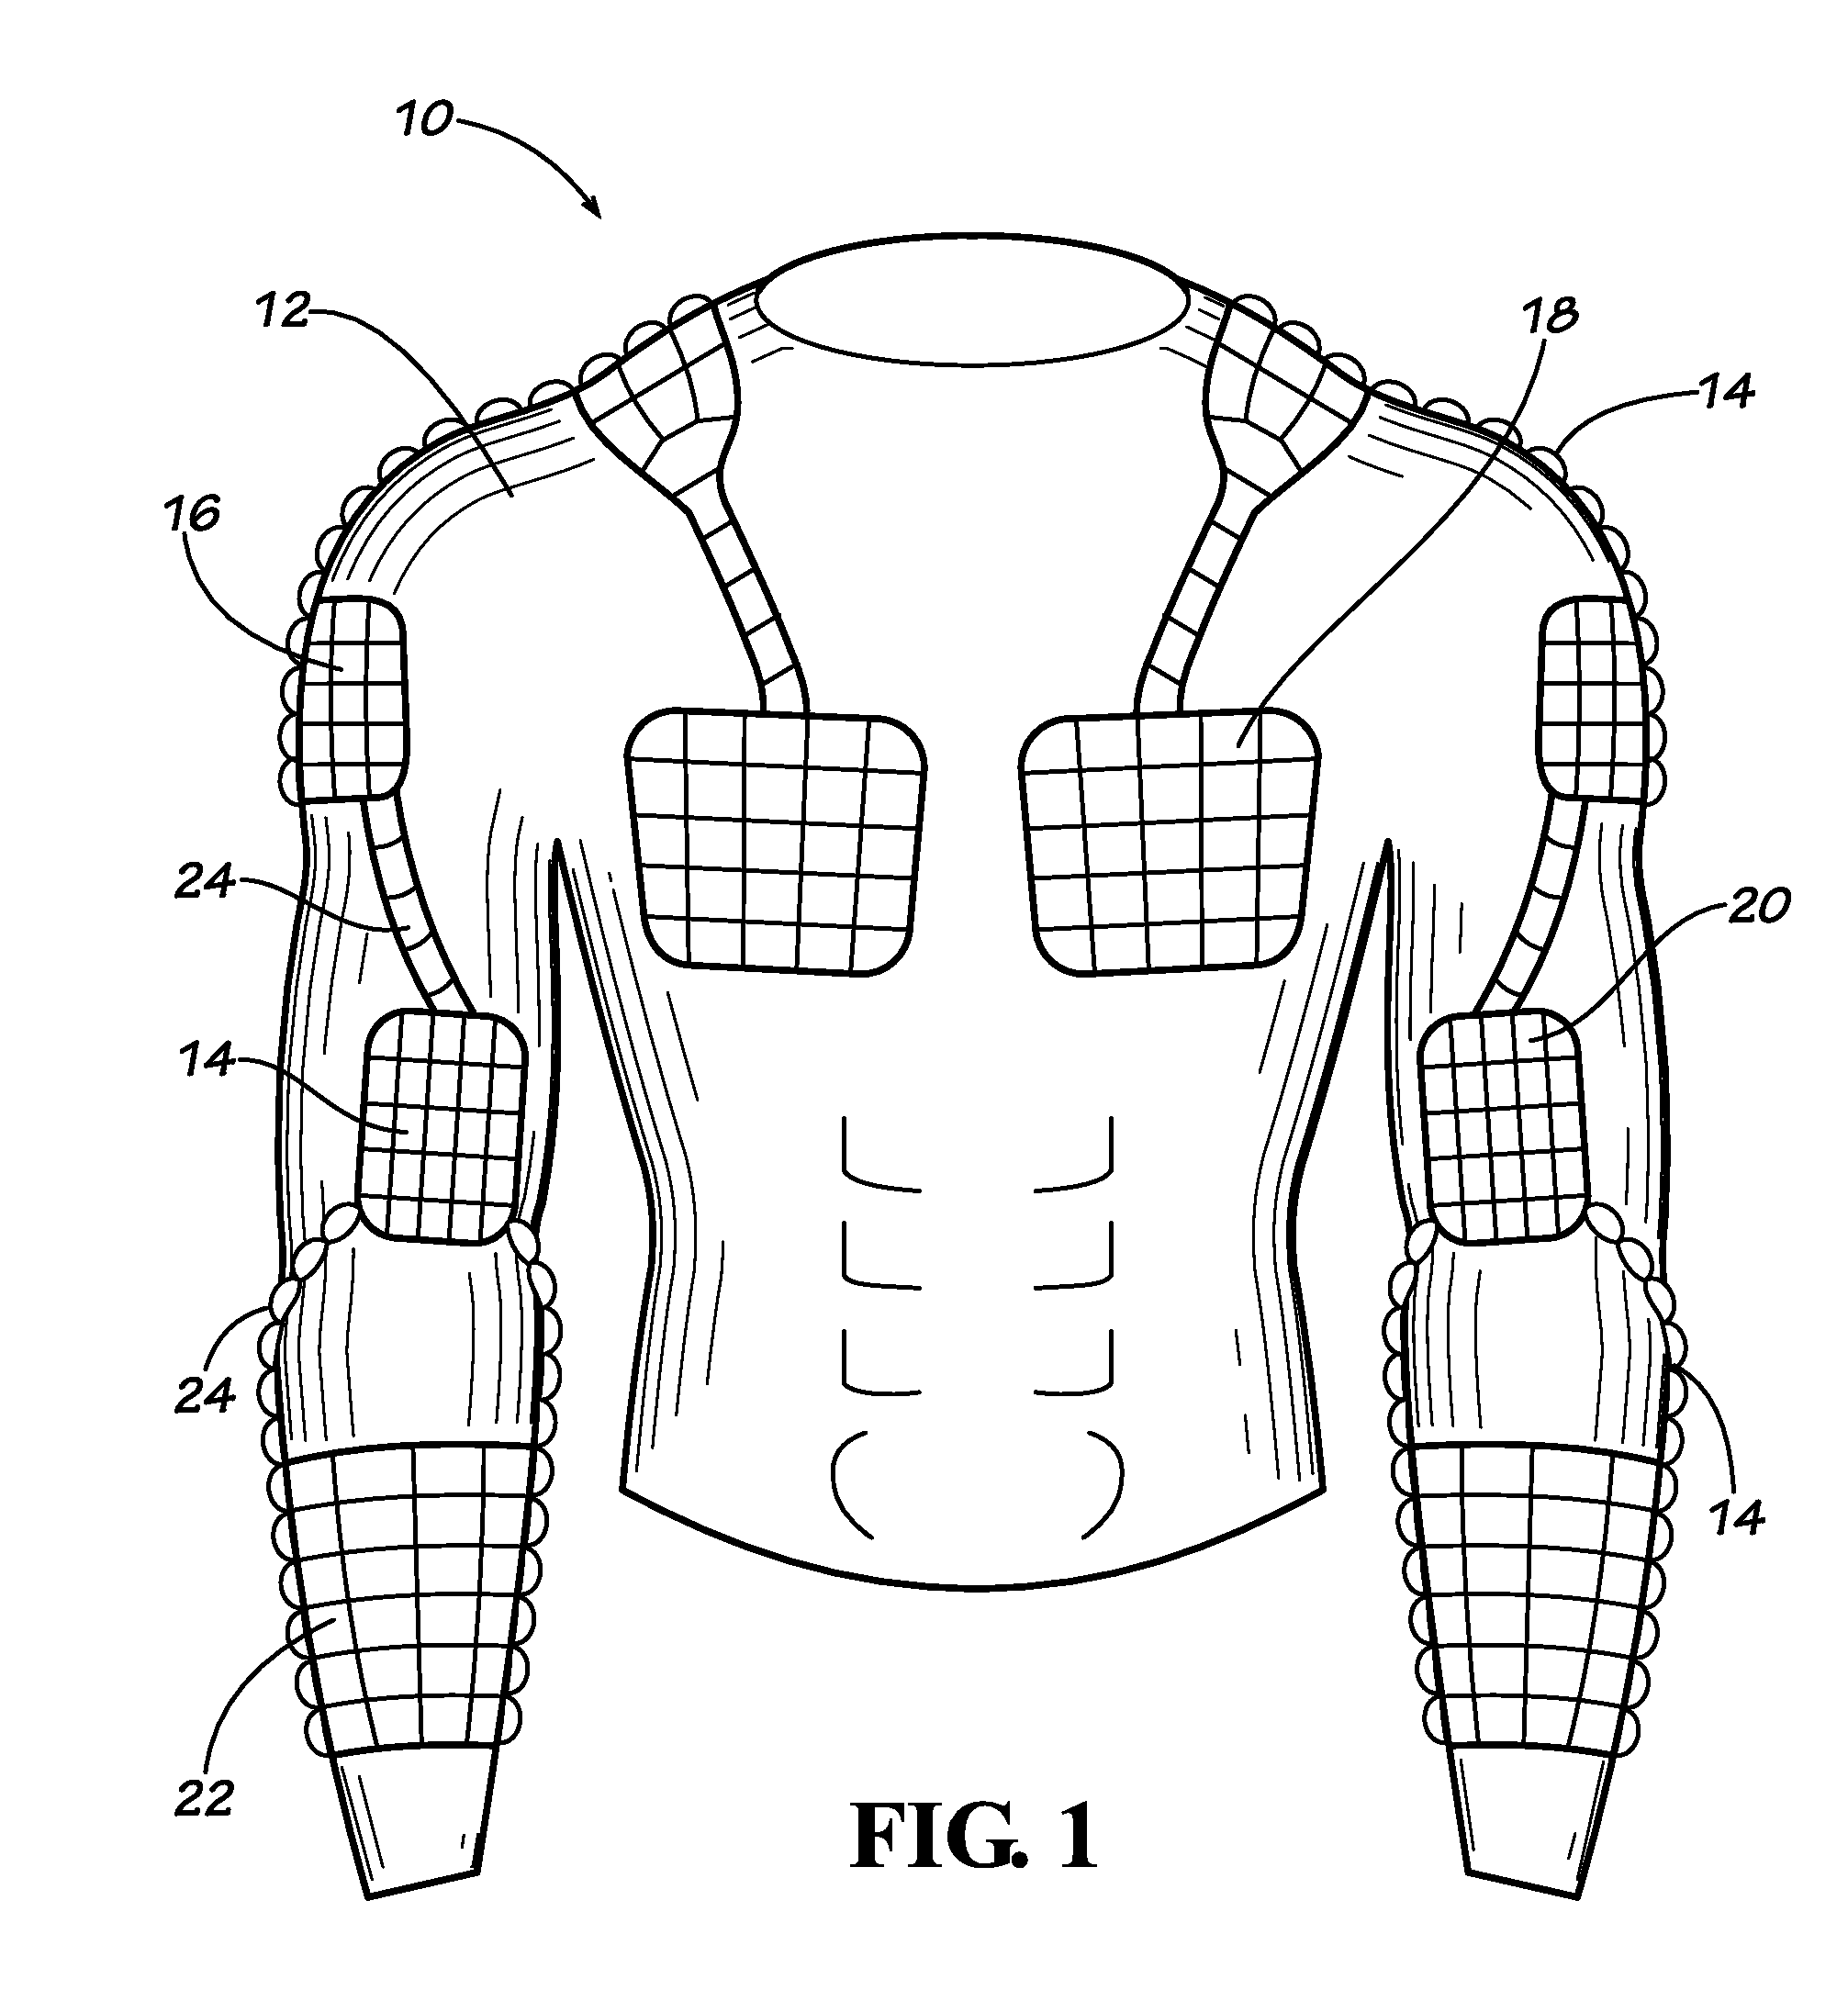 Clothing systems having resistance properties